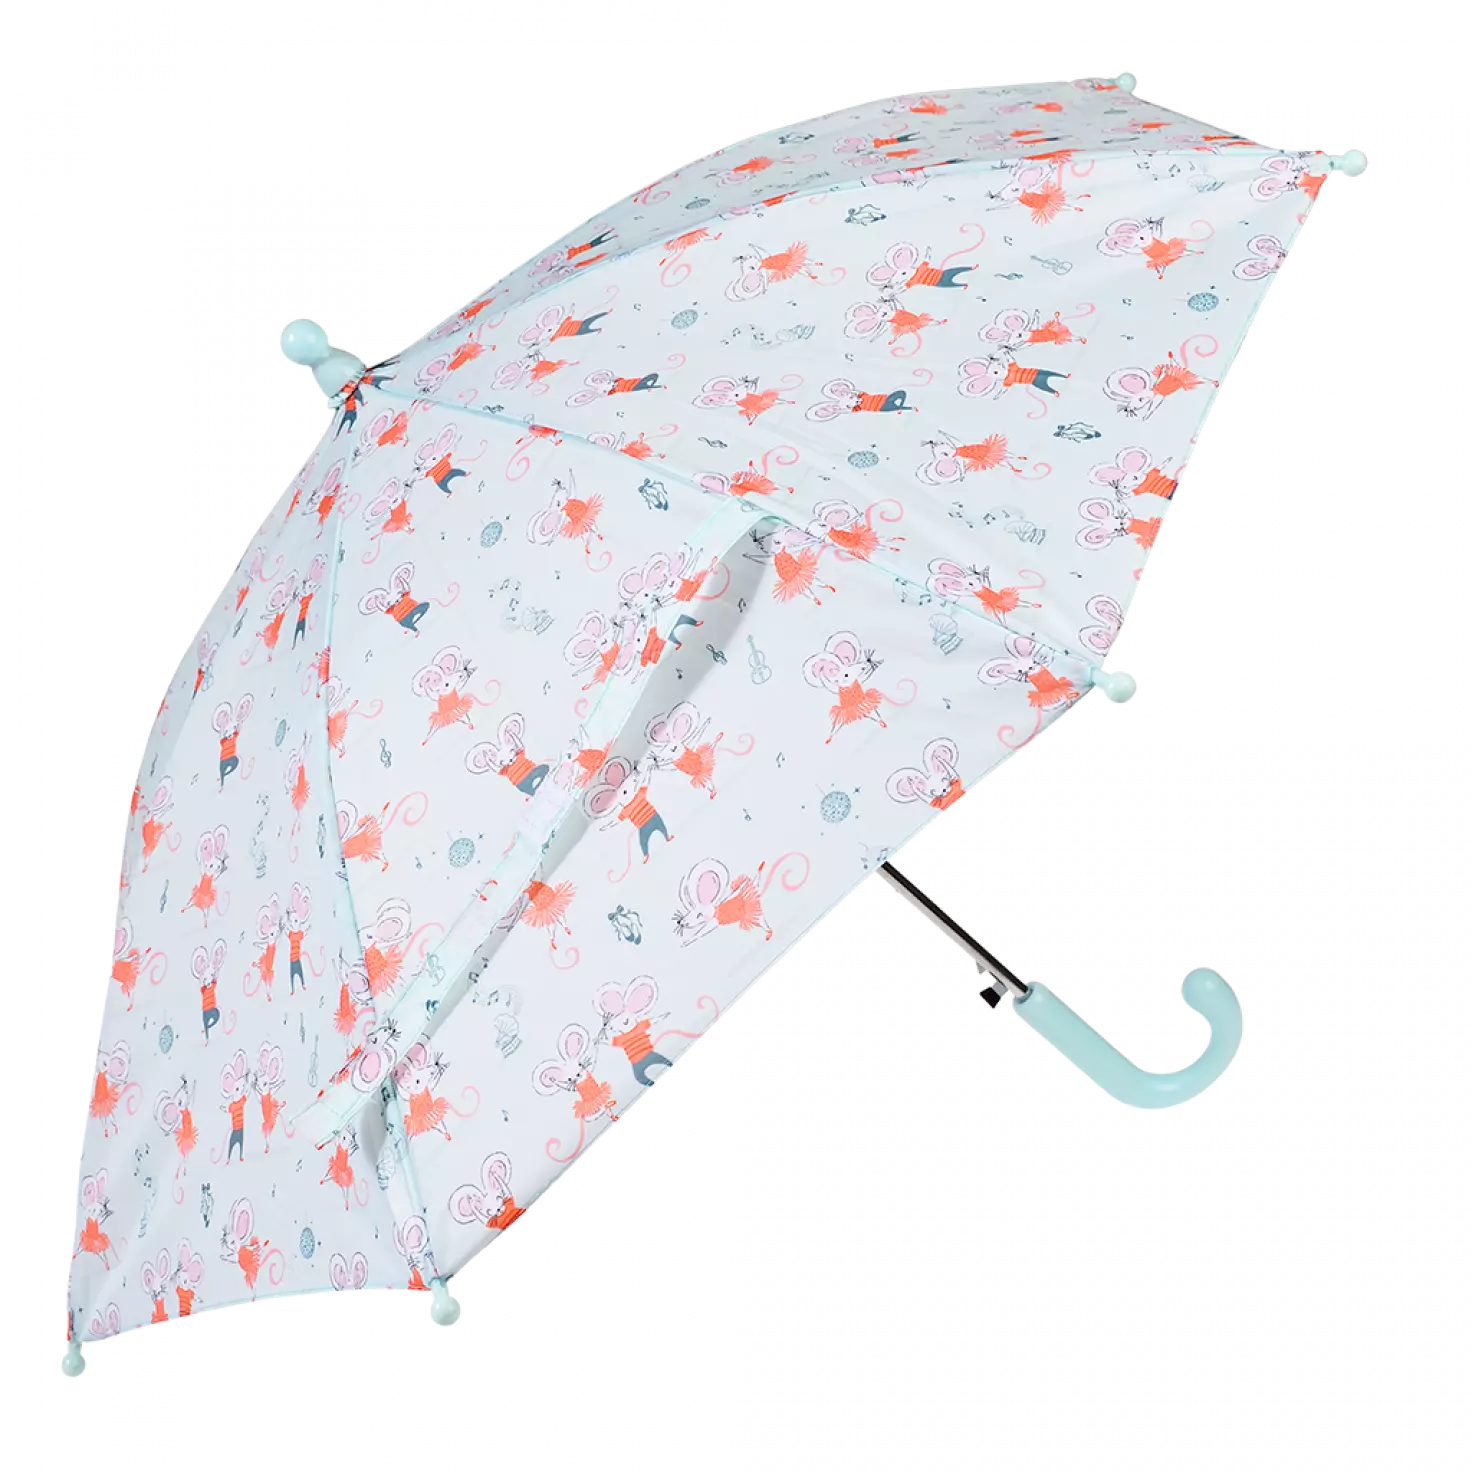 A childs umbrella by Rex London, style Mimi and Milo, in blue with multi dancing mice print and blue handle. Angled view of umbrella open.